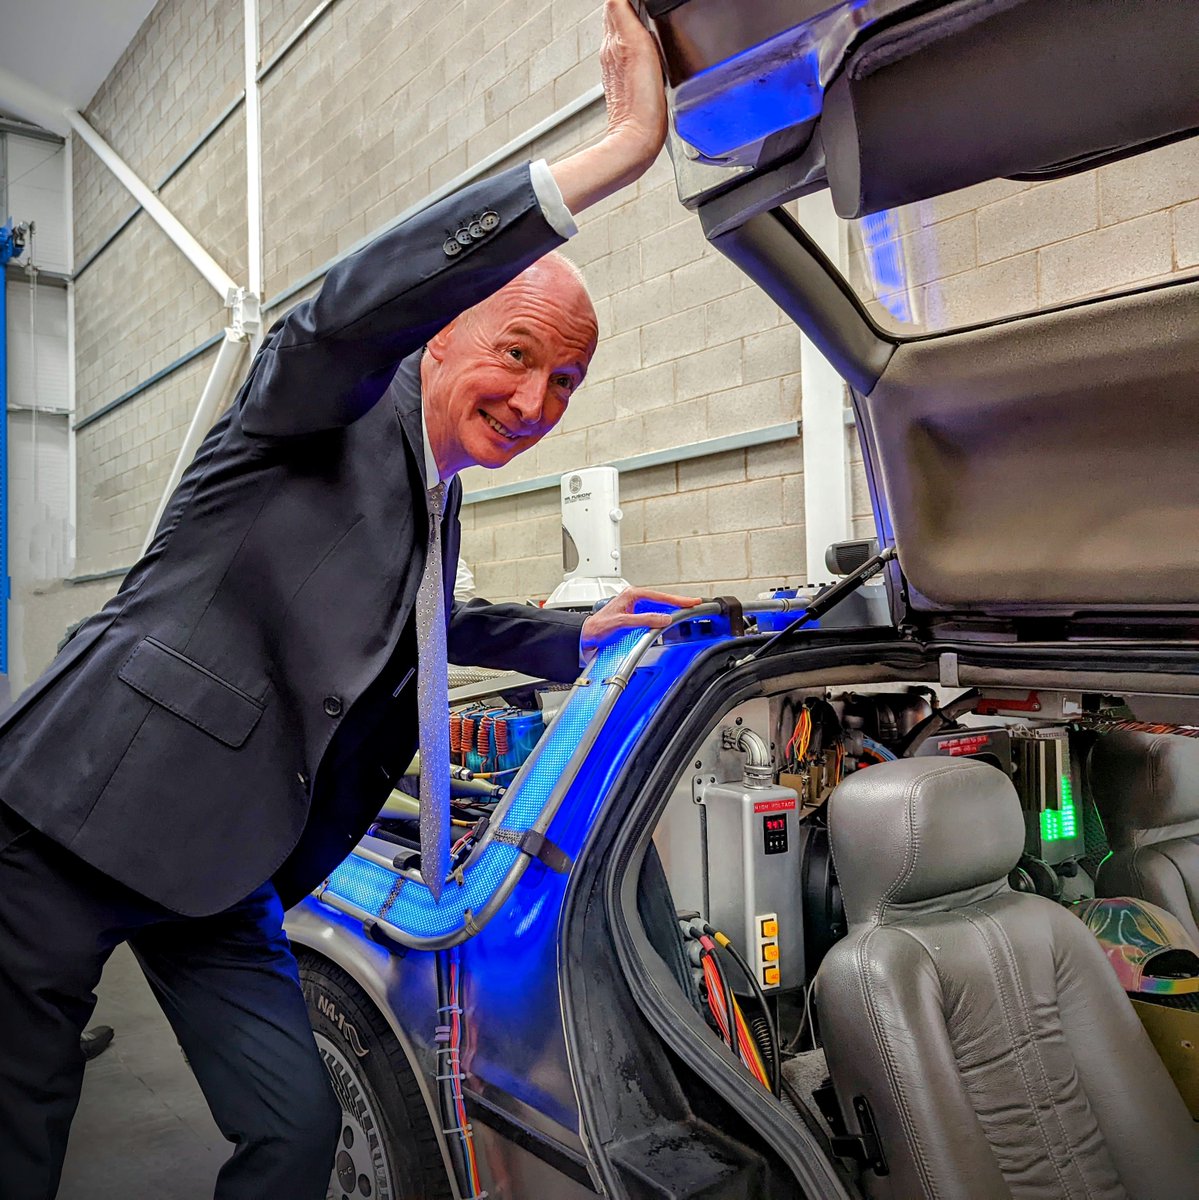 Today, we were pleased to welcome Pat McFadden (@patmcfaddenmp), MP for Wolverhampton South East to the launch of our Electric Vehicle and Green Technologies Centre. Thank you, Pat Mcfadden, for your ongoing support of the college. #EVlaunch #DefiningFutures.